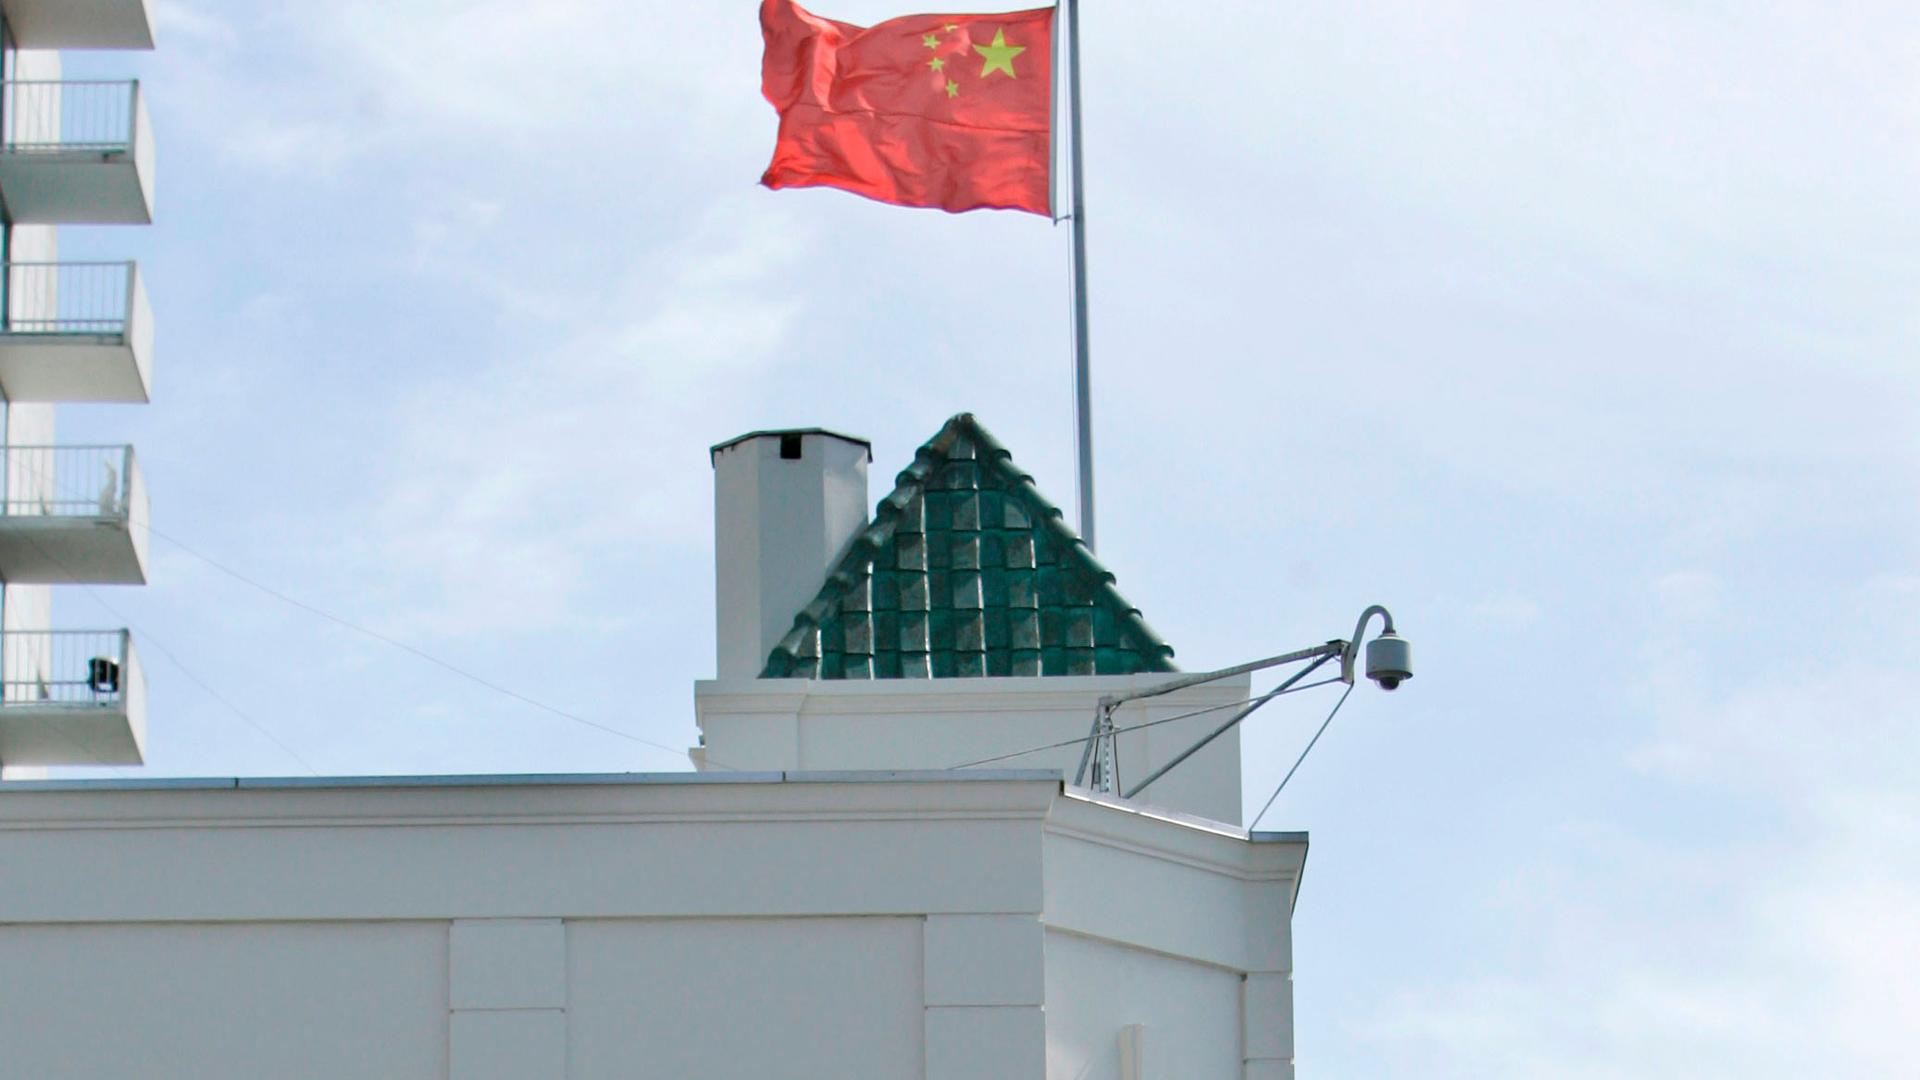 The top of a white building is shown with a Chinese flag flying.